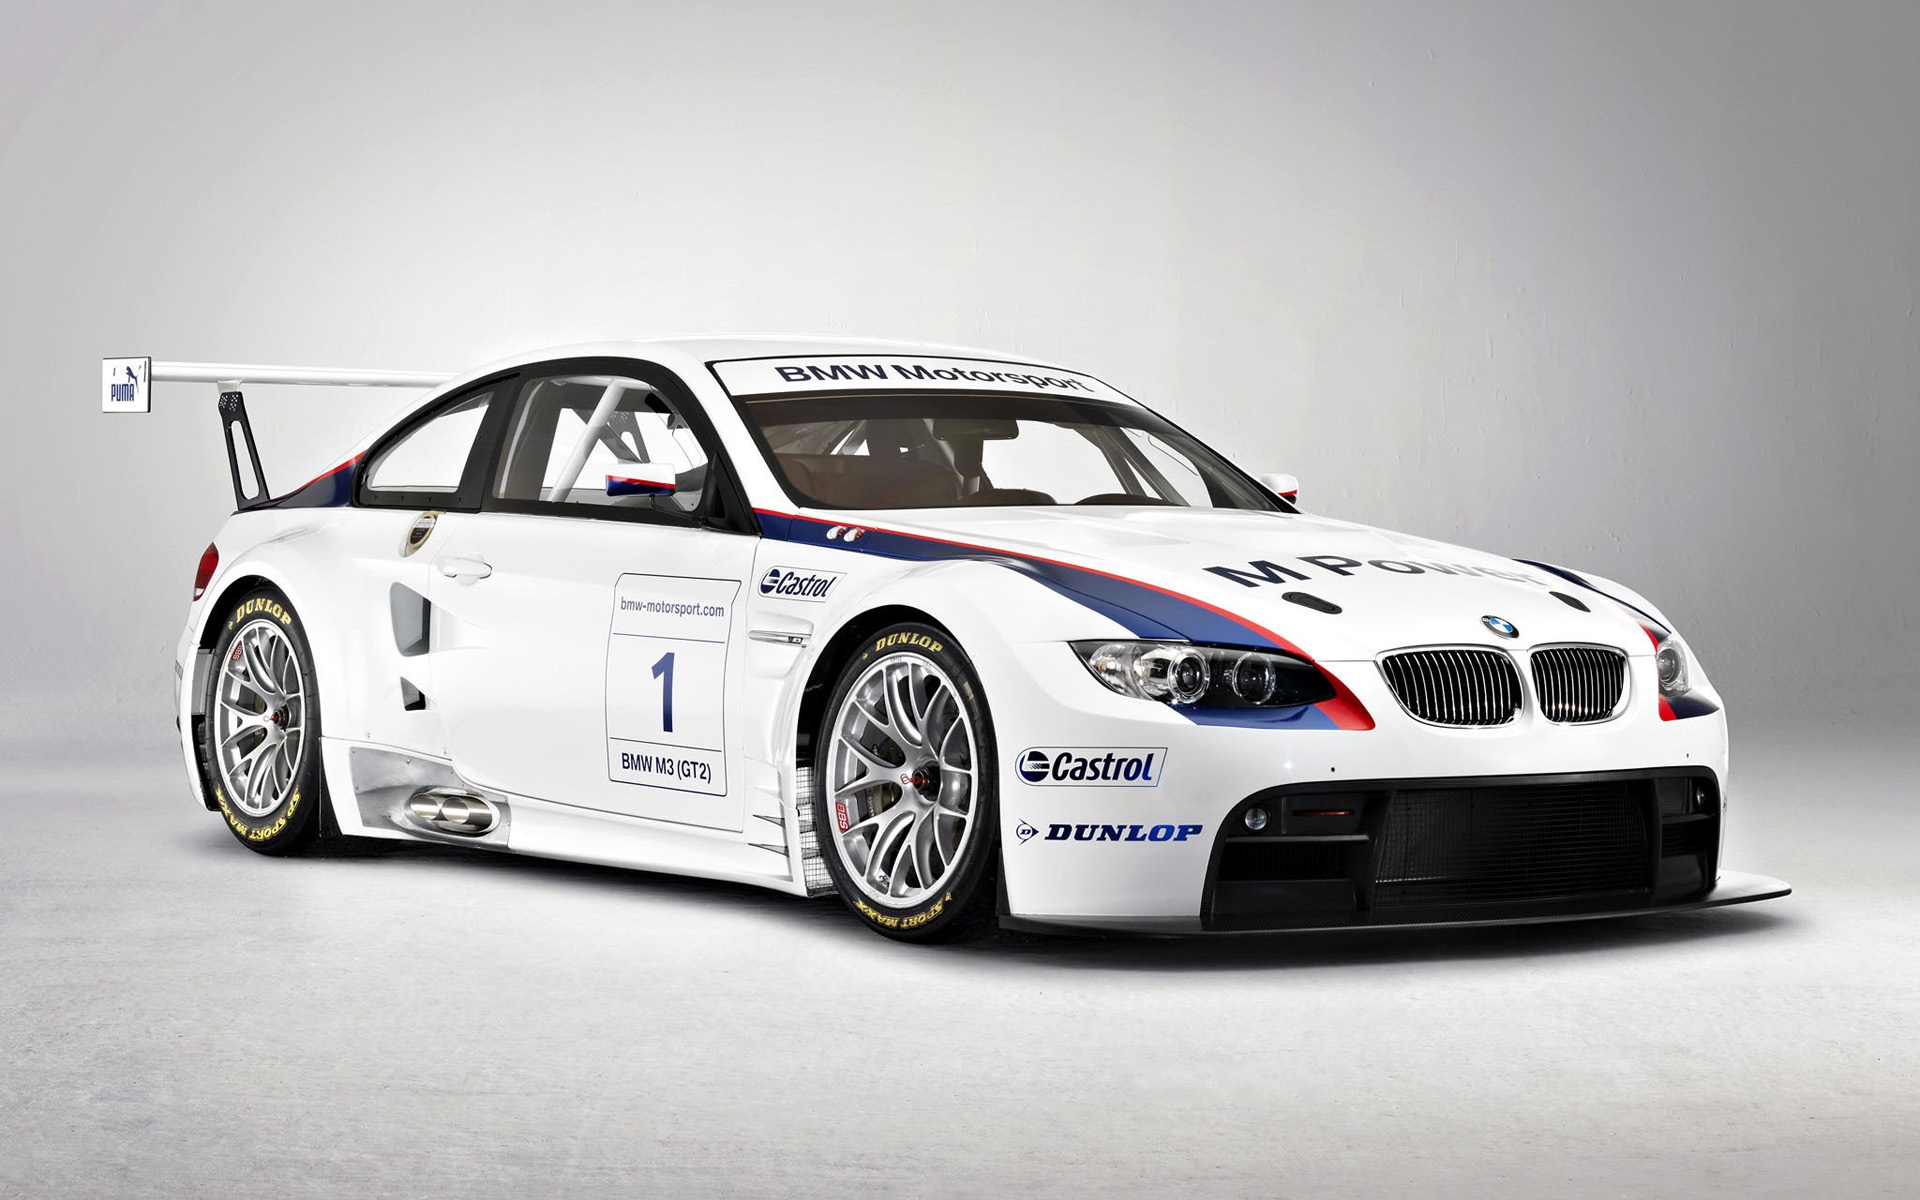 Back Gallery For Bmw Racing Car Photos